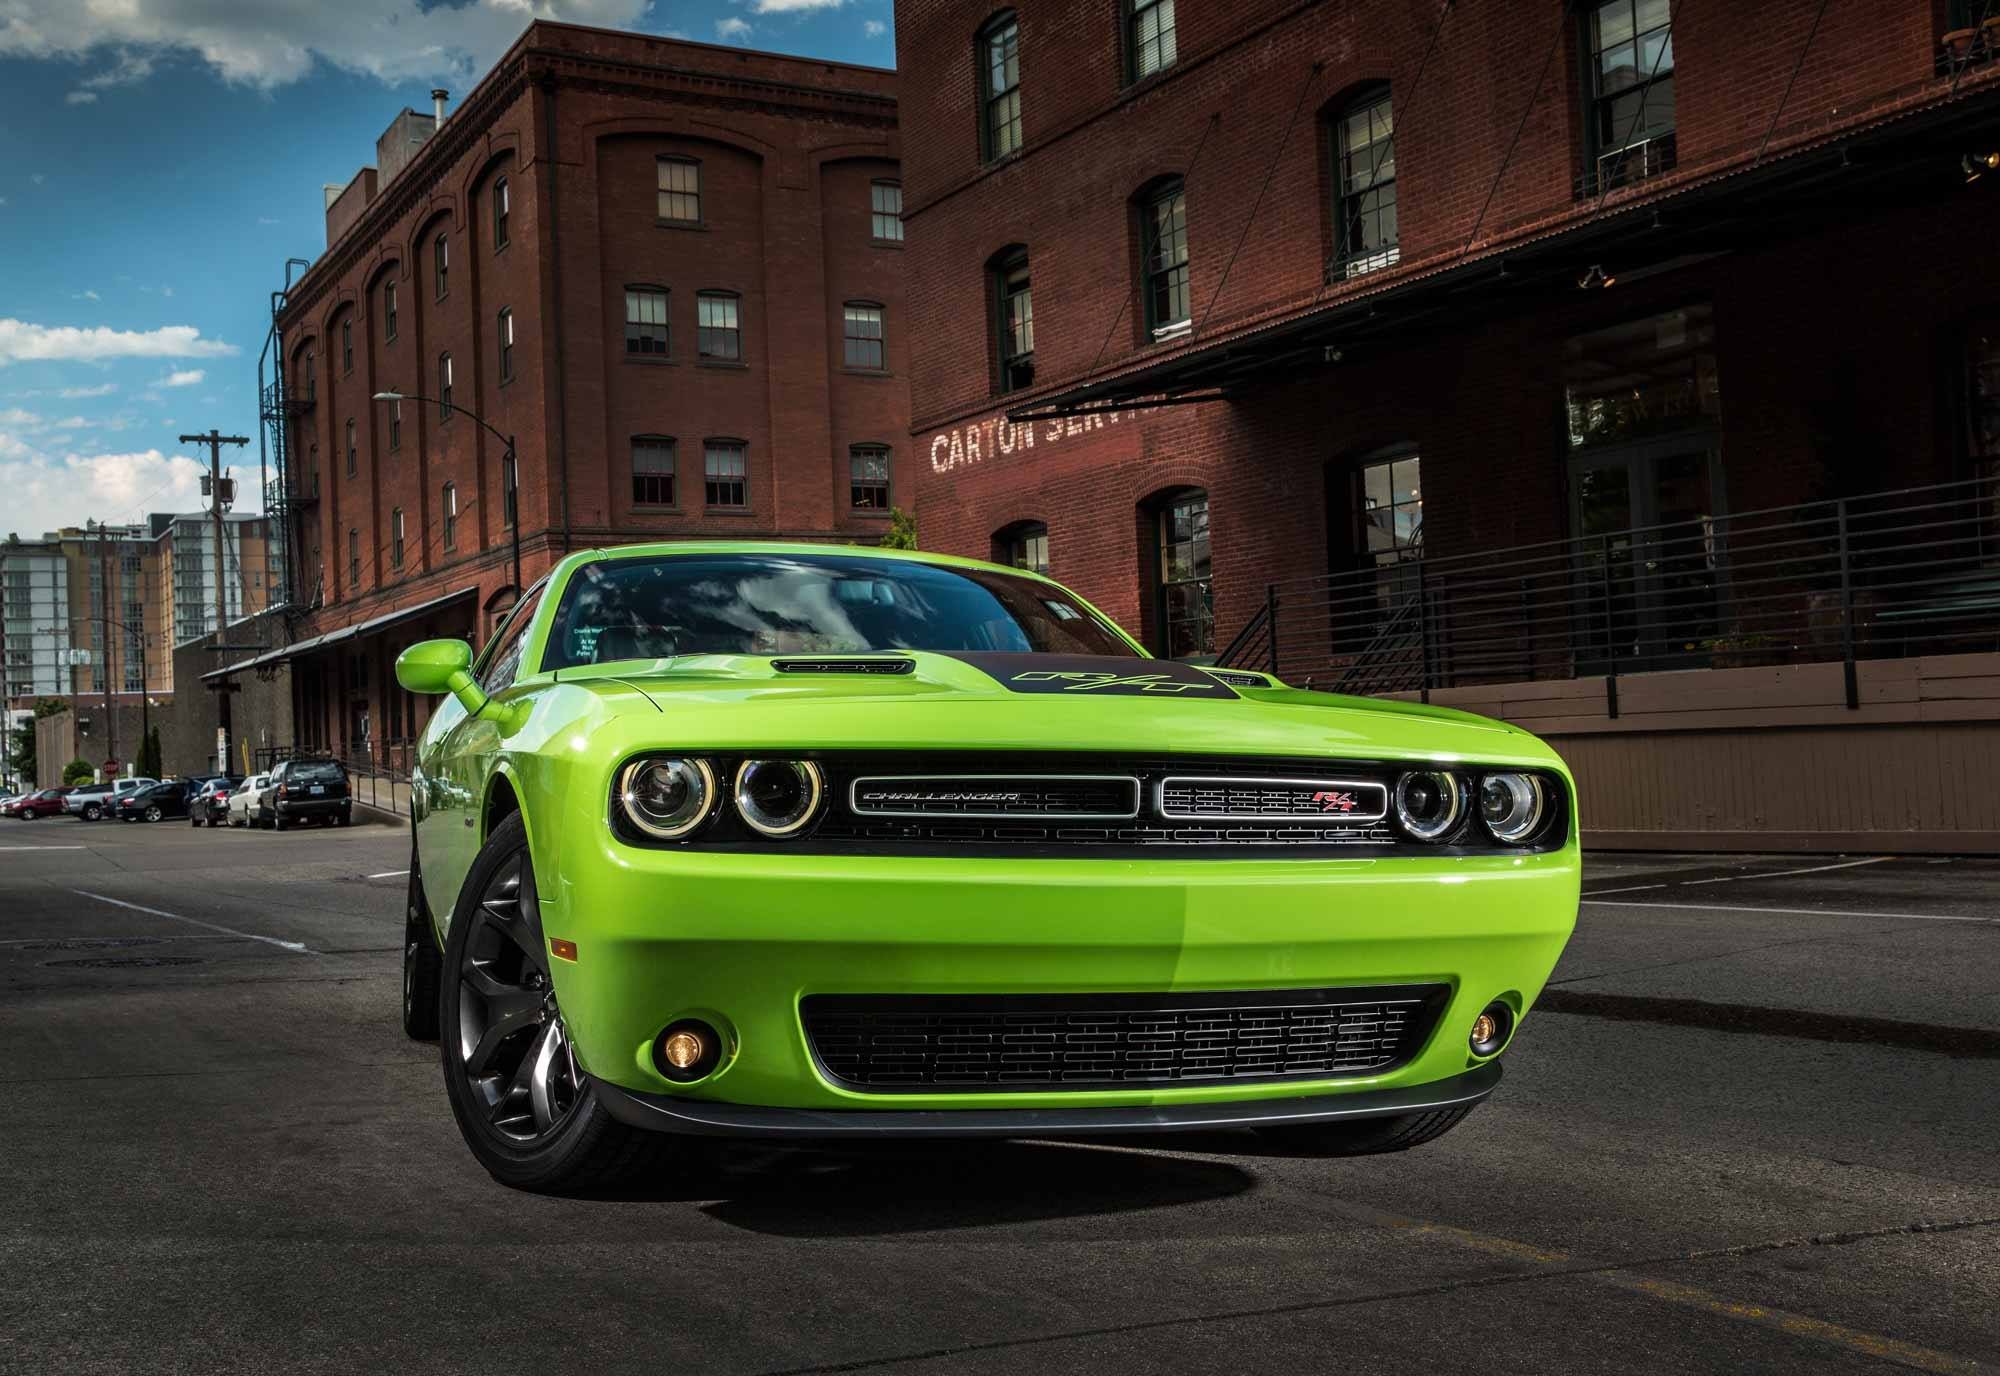 General 2000x1376 Dodge urban green cars vehicle car Dodge Challenger muscle cars American cars